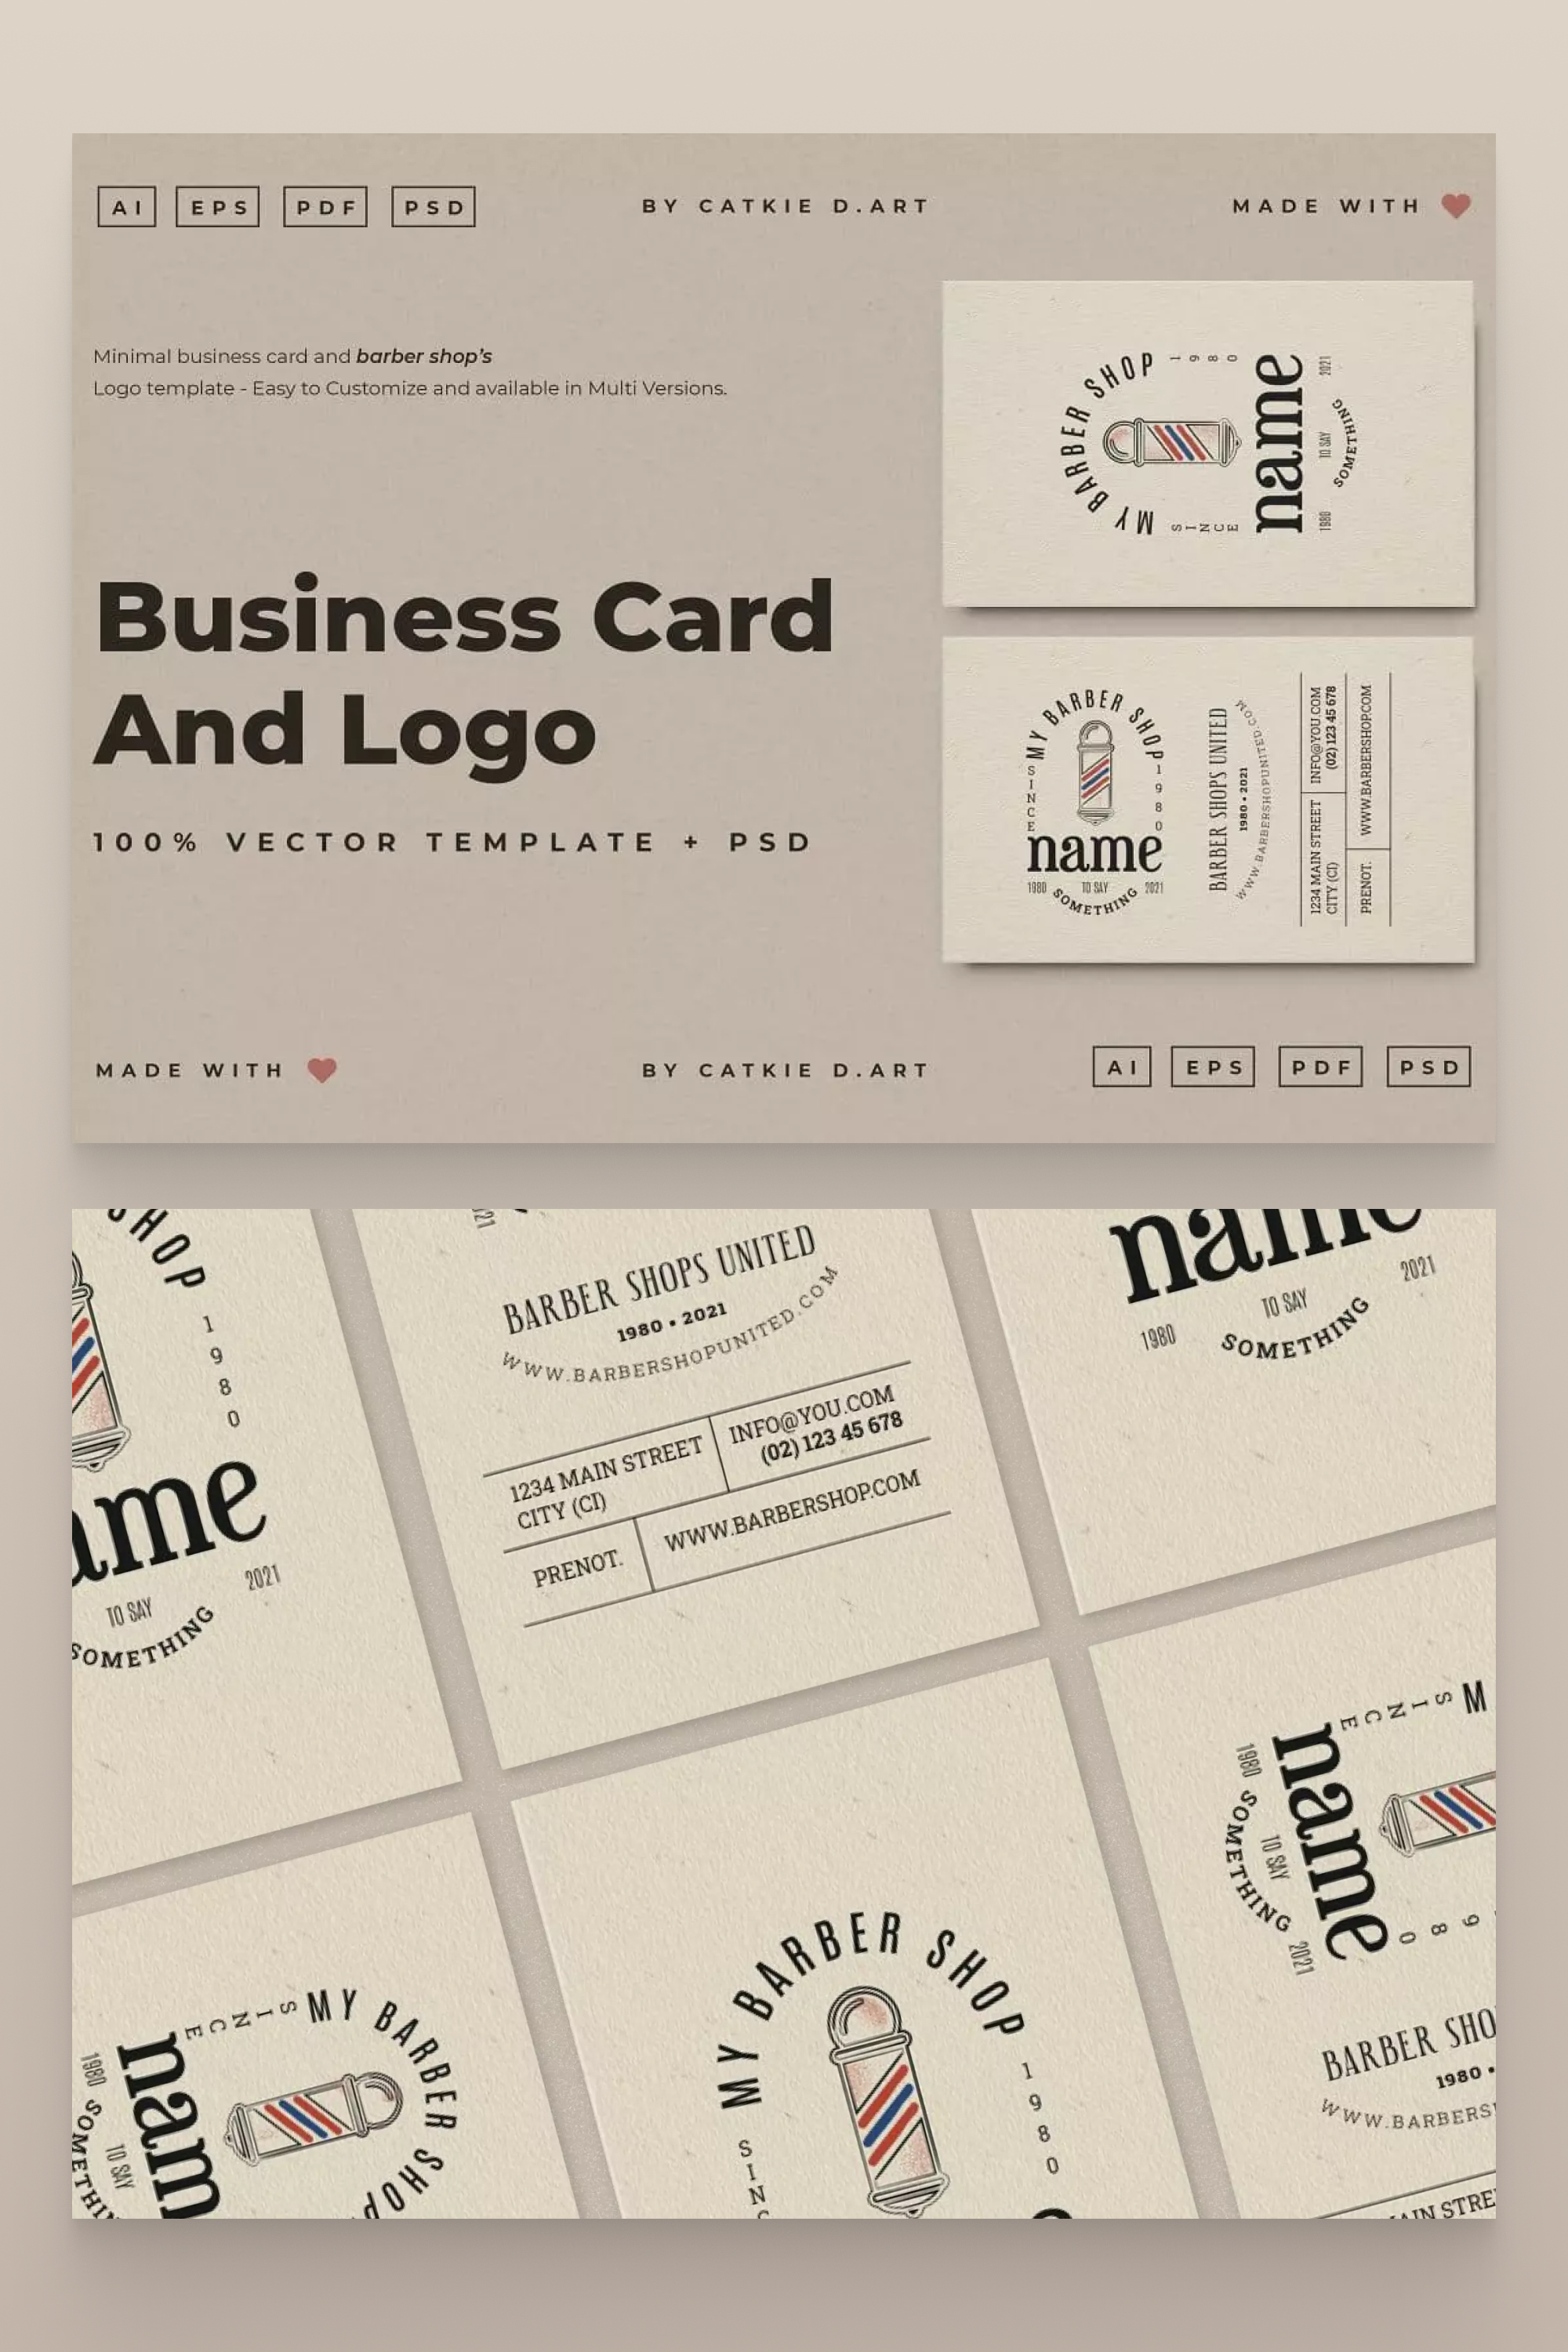 A set of business cards for a barbershop in taupe tones.